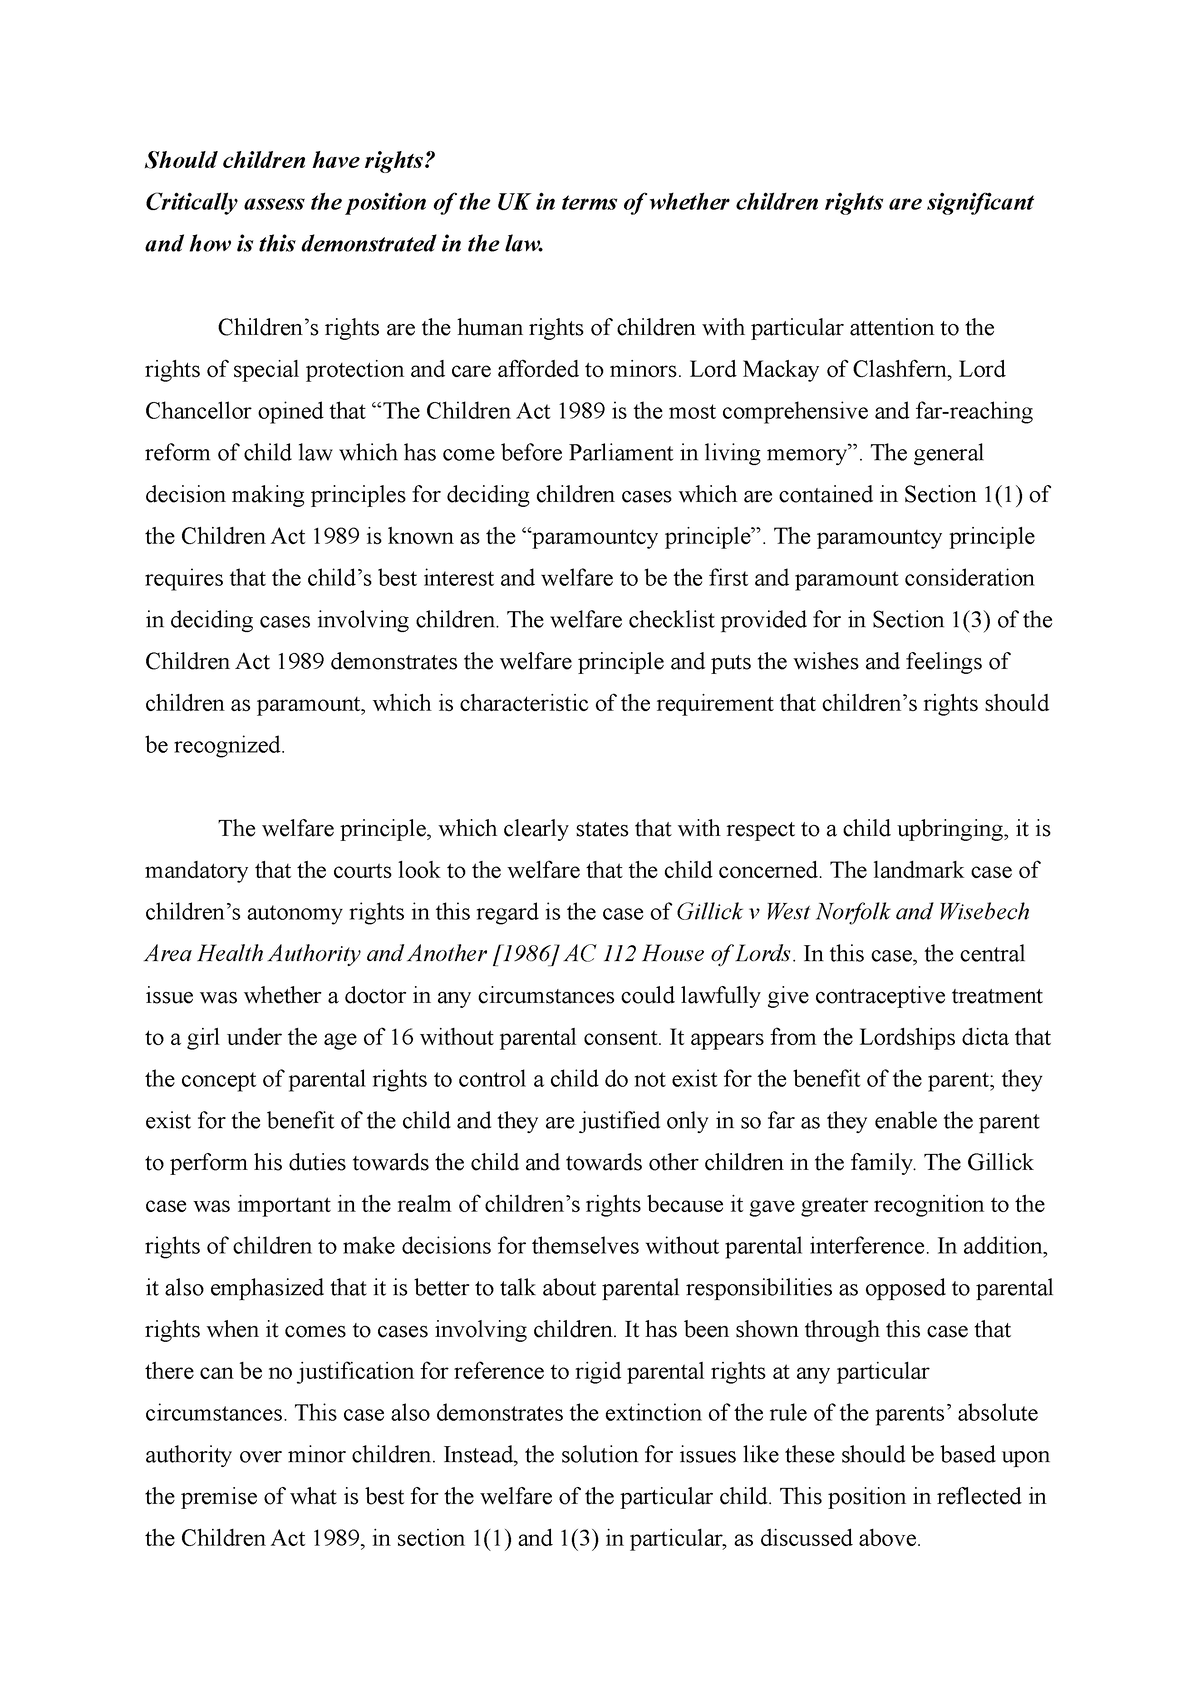 conclusion of child rights essay